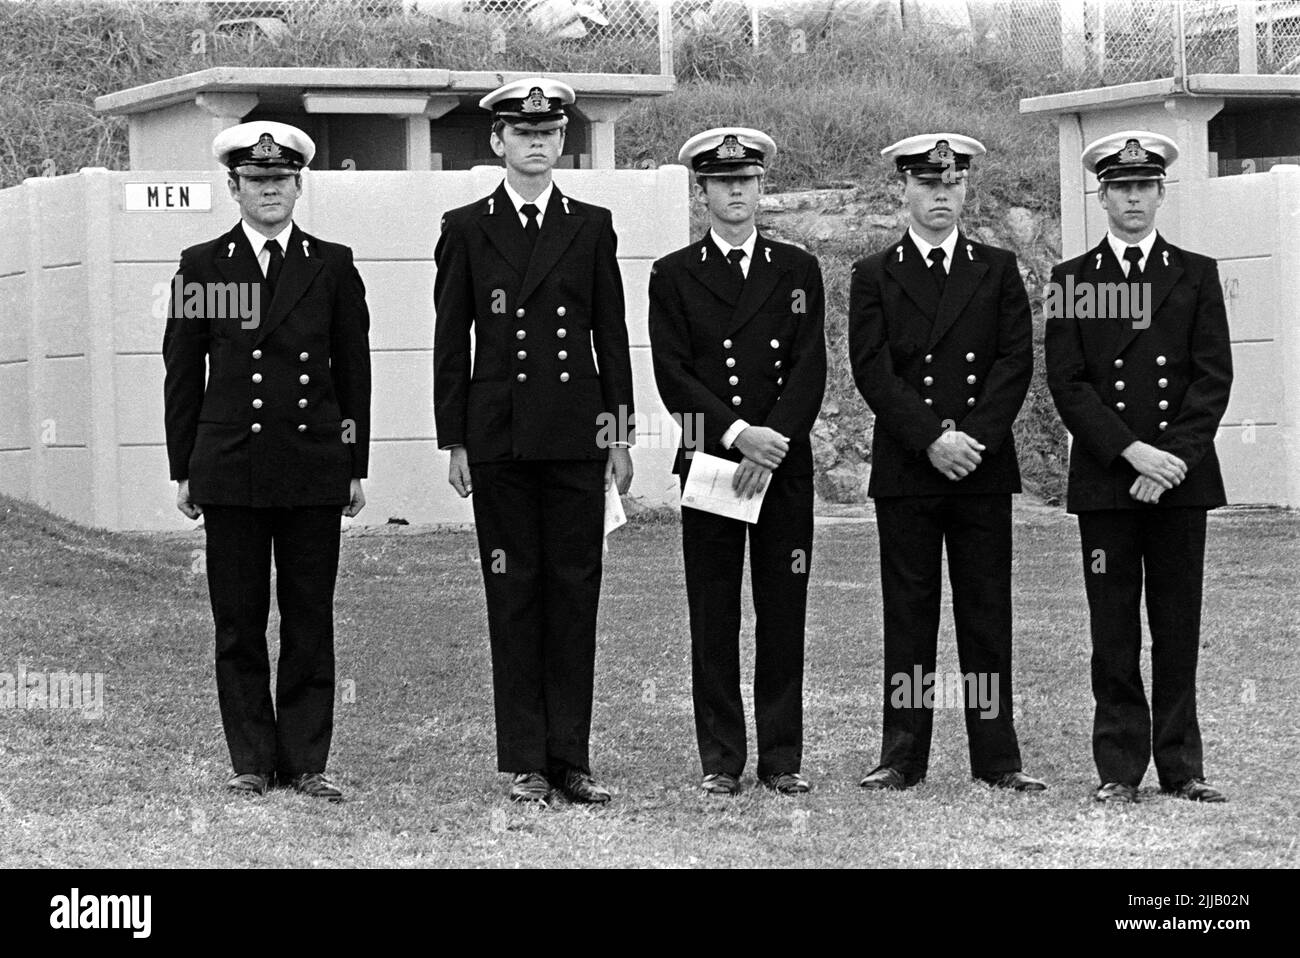 Young officer naval cadets from the Royal Australian Navy training establishment HMAS Creswell at Jervis Bay, attending an Anzac Day service at Huskisson, NSW. in 1981 Stock Photo